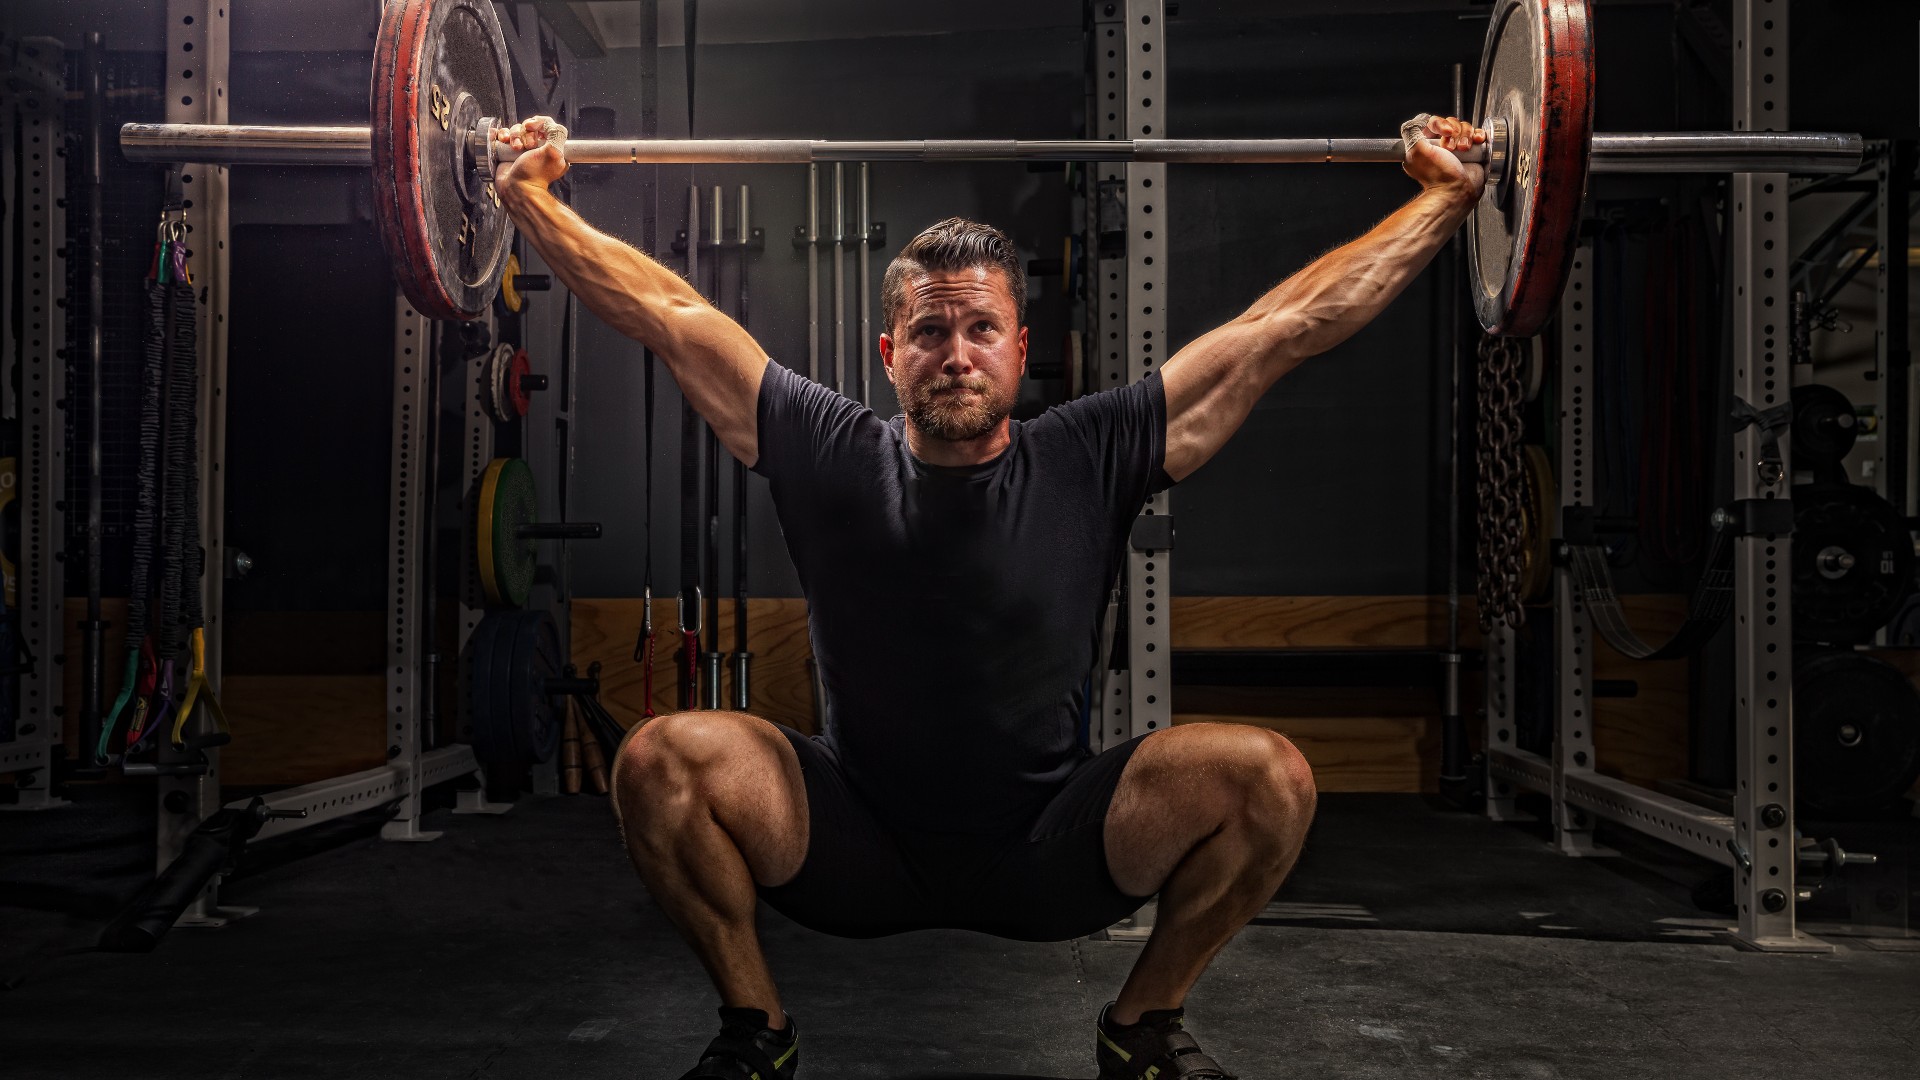 A man performs a snatch with a bar over his head in a squatting position